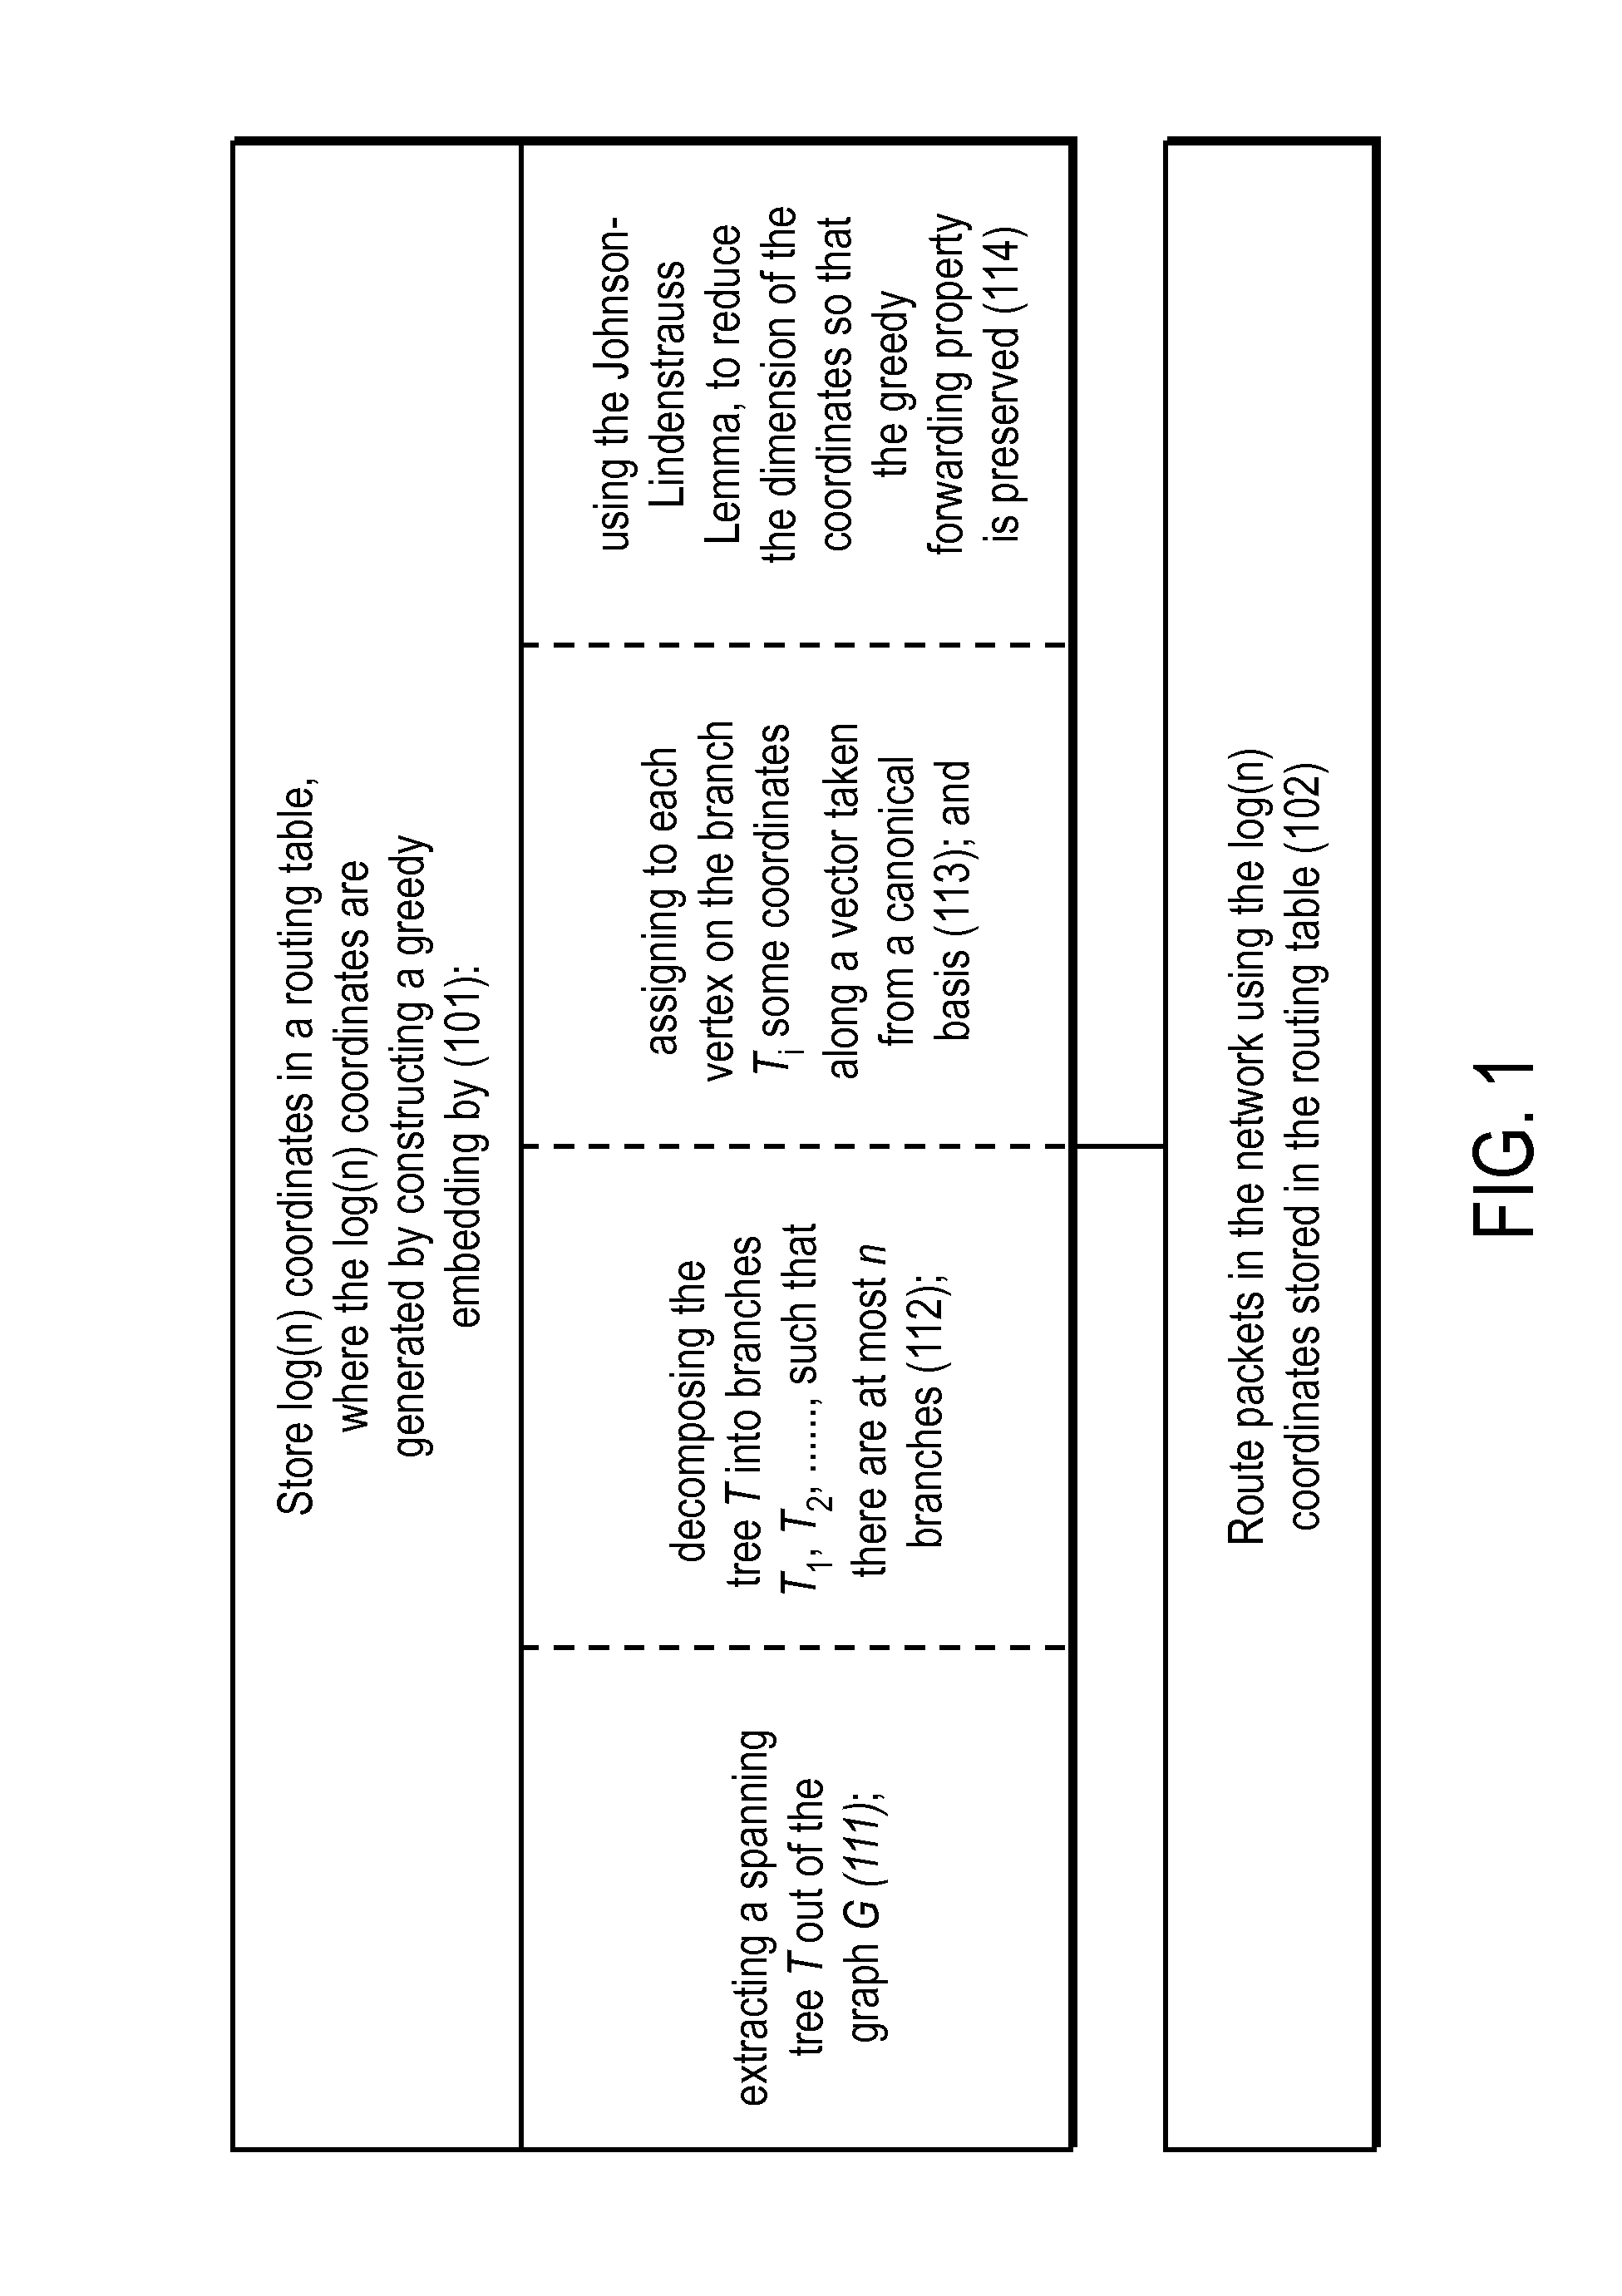 Method for scalable routing with greedy embedding